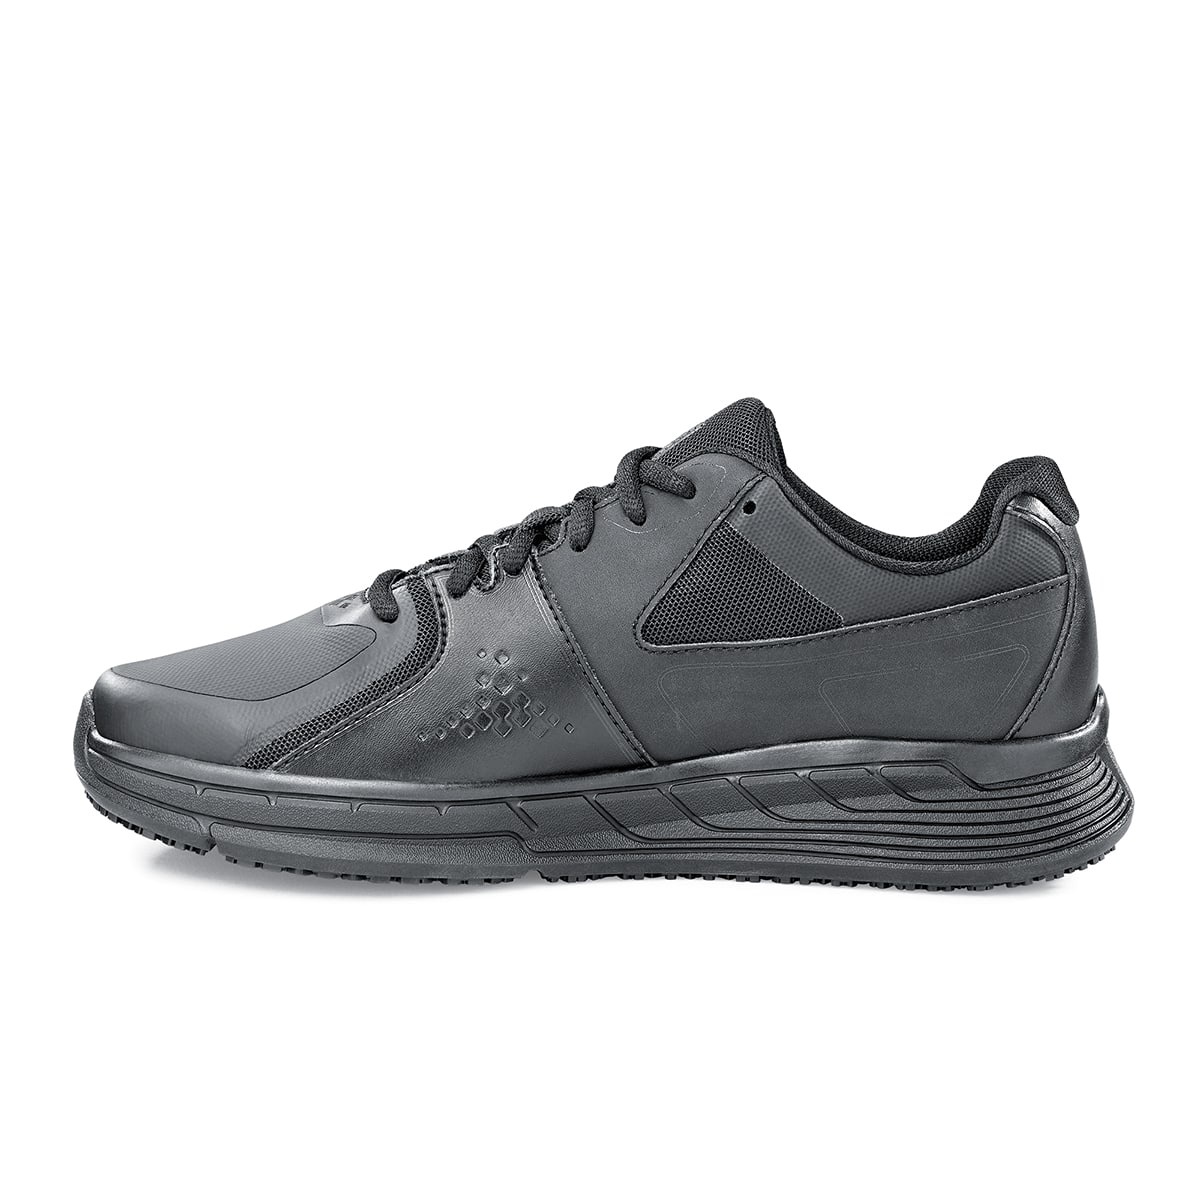 The Condor Women's Black from Shoes for Crews is a slip-resistant shoe with laces, with additional padding and a removable cushioned insole, seen from the left.